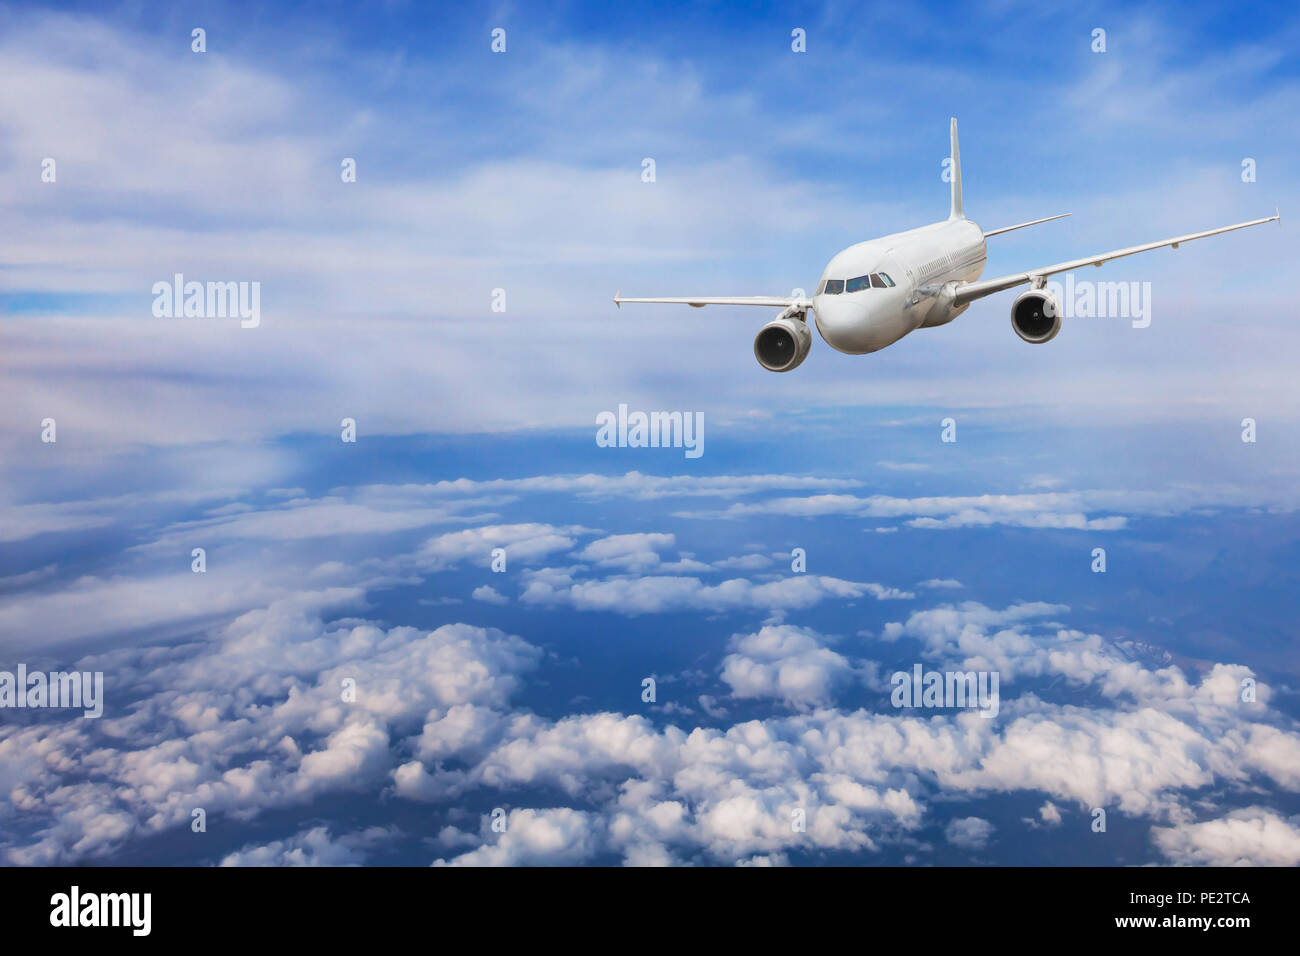 airplane flying above the clouds, travel concept, aircraft jet plane in blue sky Stock Photo